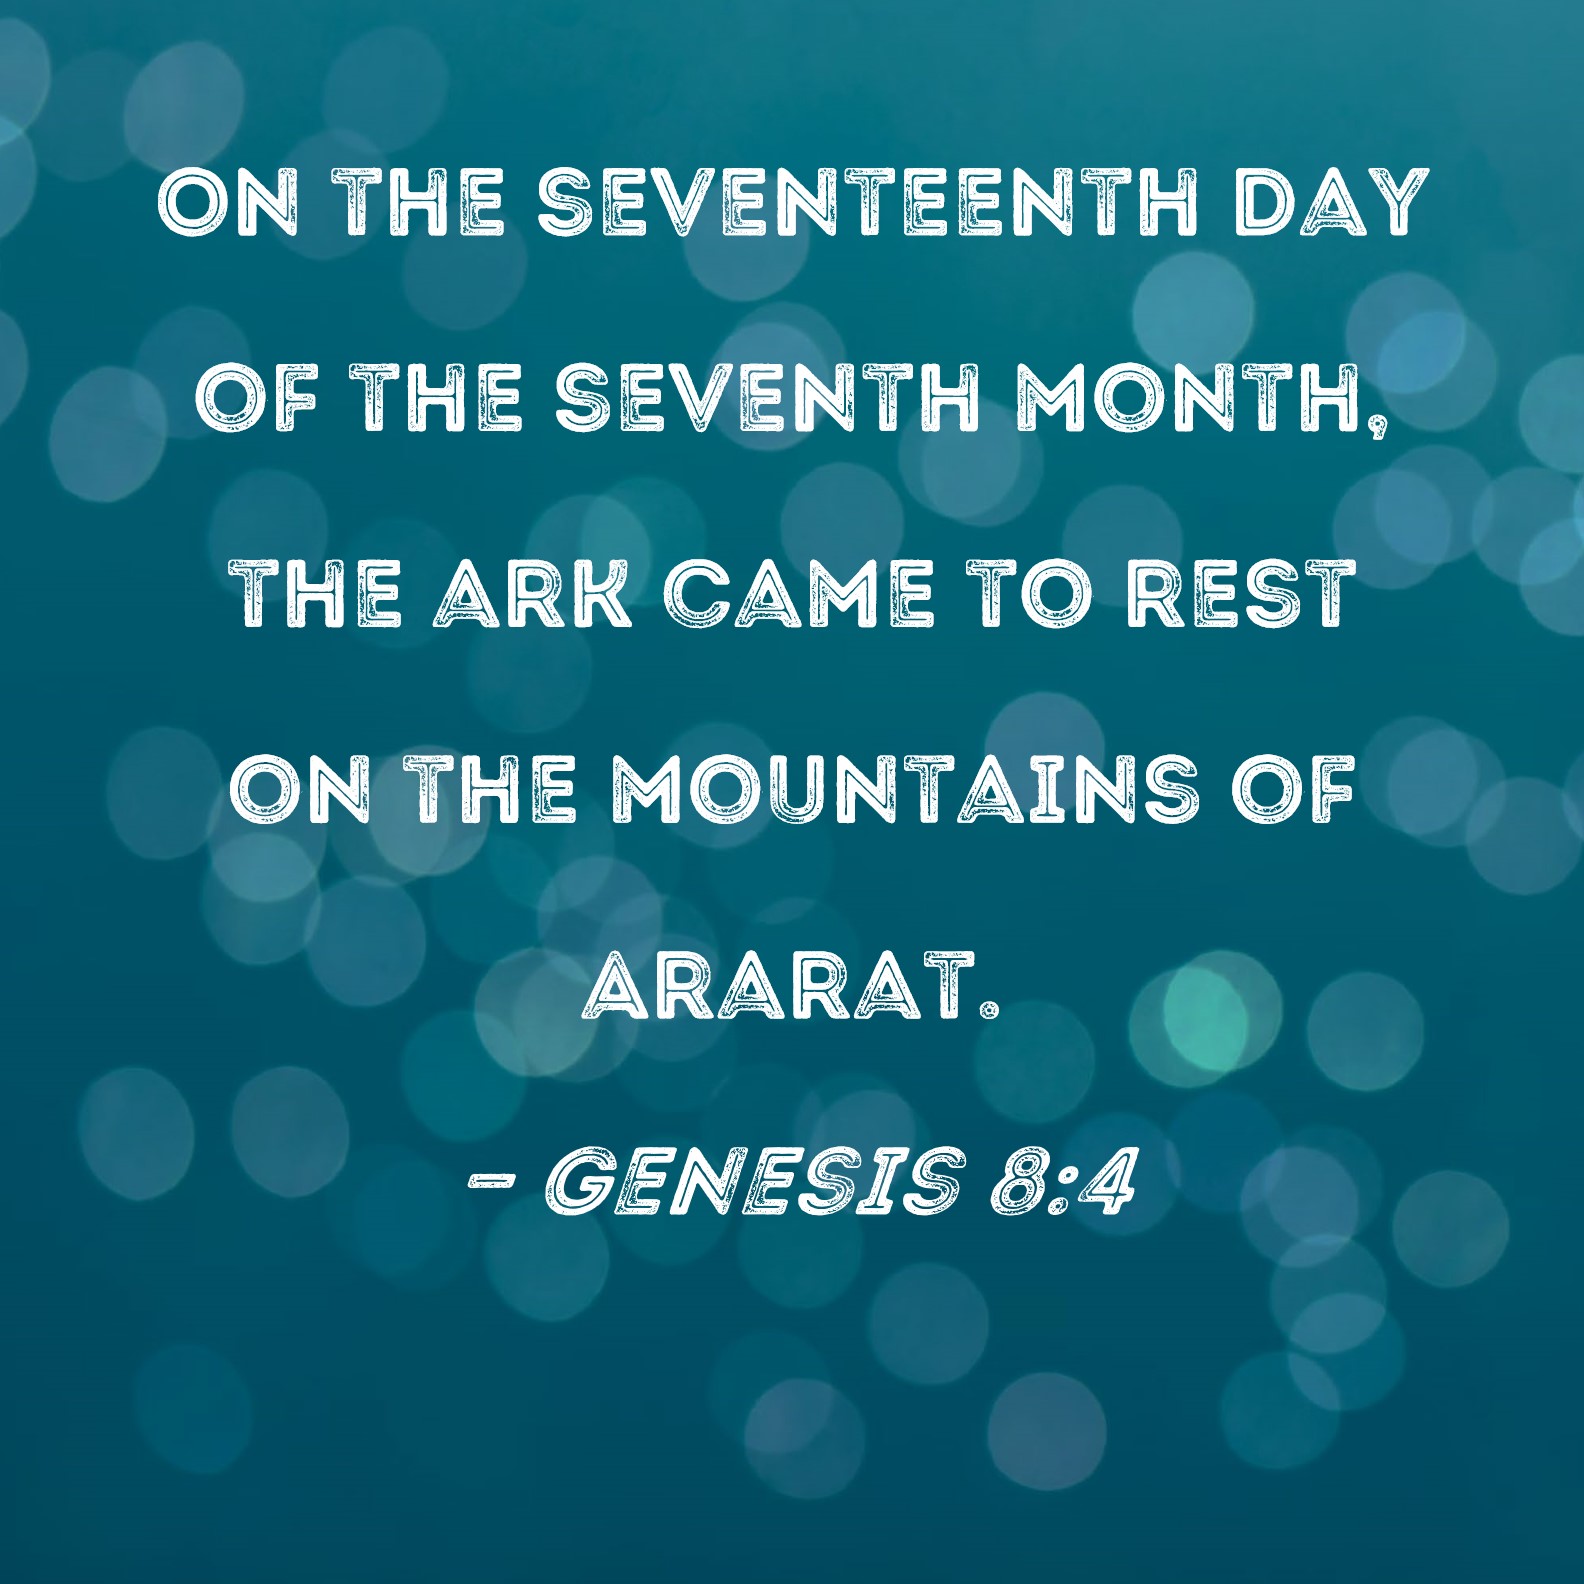 Genesis 8:4 On the seventeenth day of the seventh month, the ark